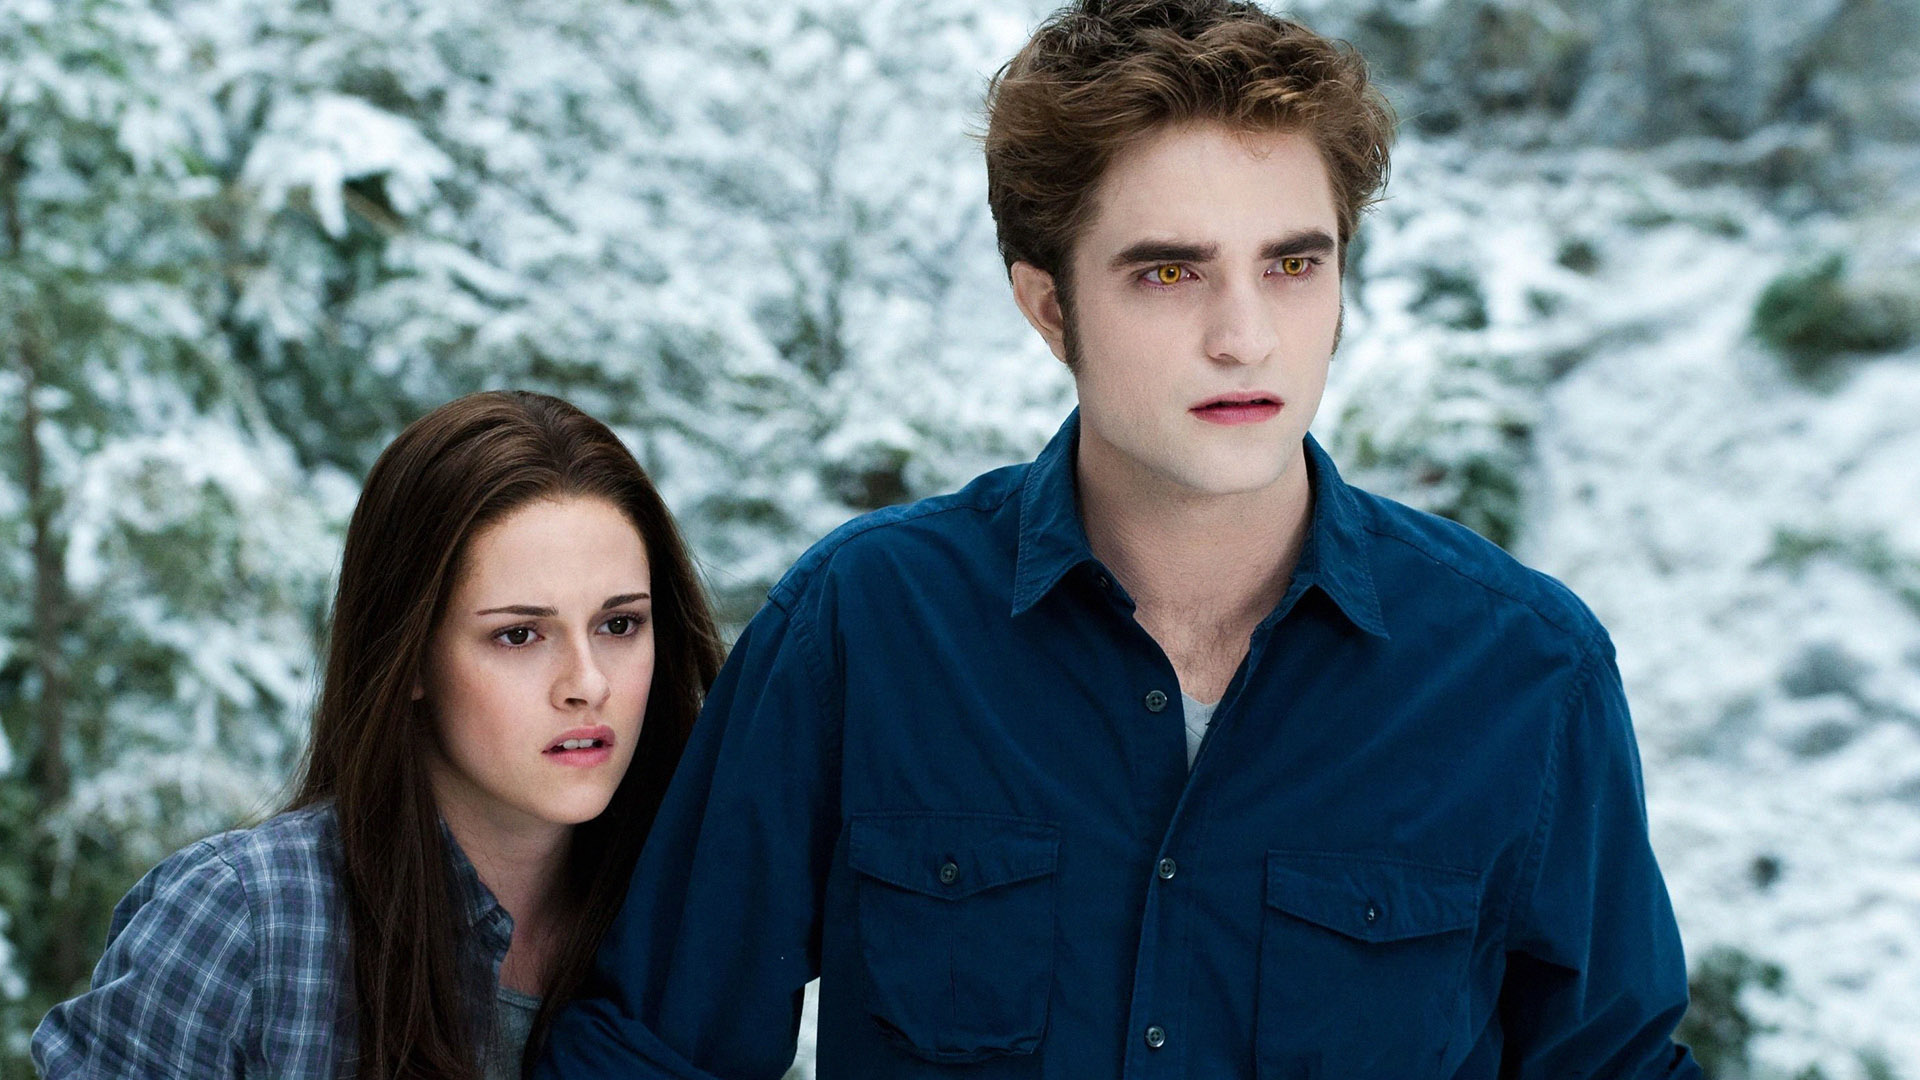 Longing for a Twilight Reboot? These 2 Modern–Day Stars Might as Well Lead the Cast